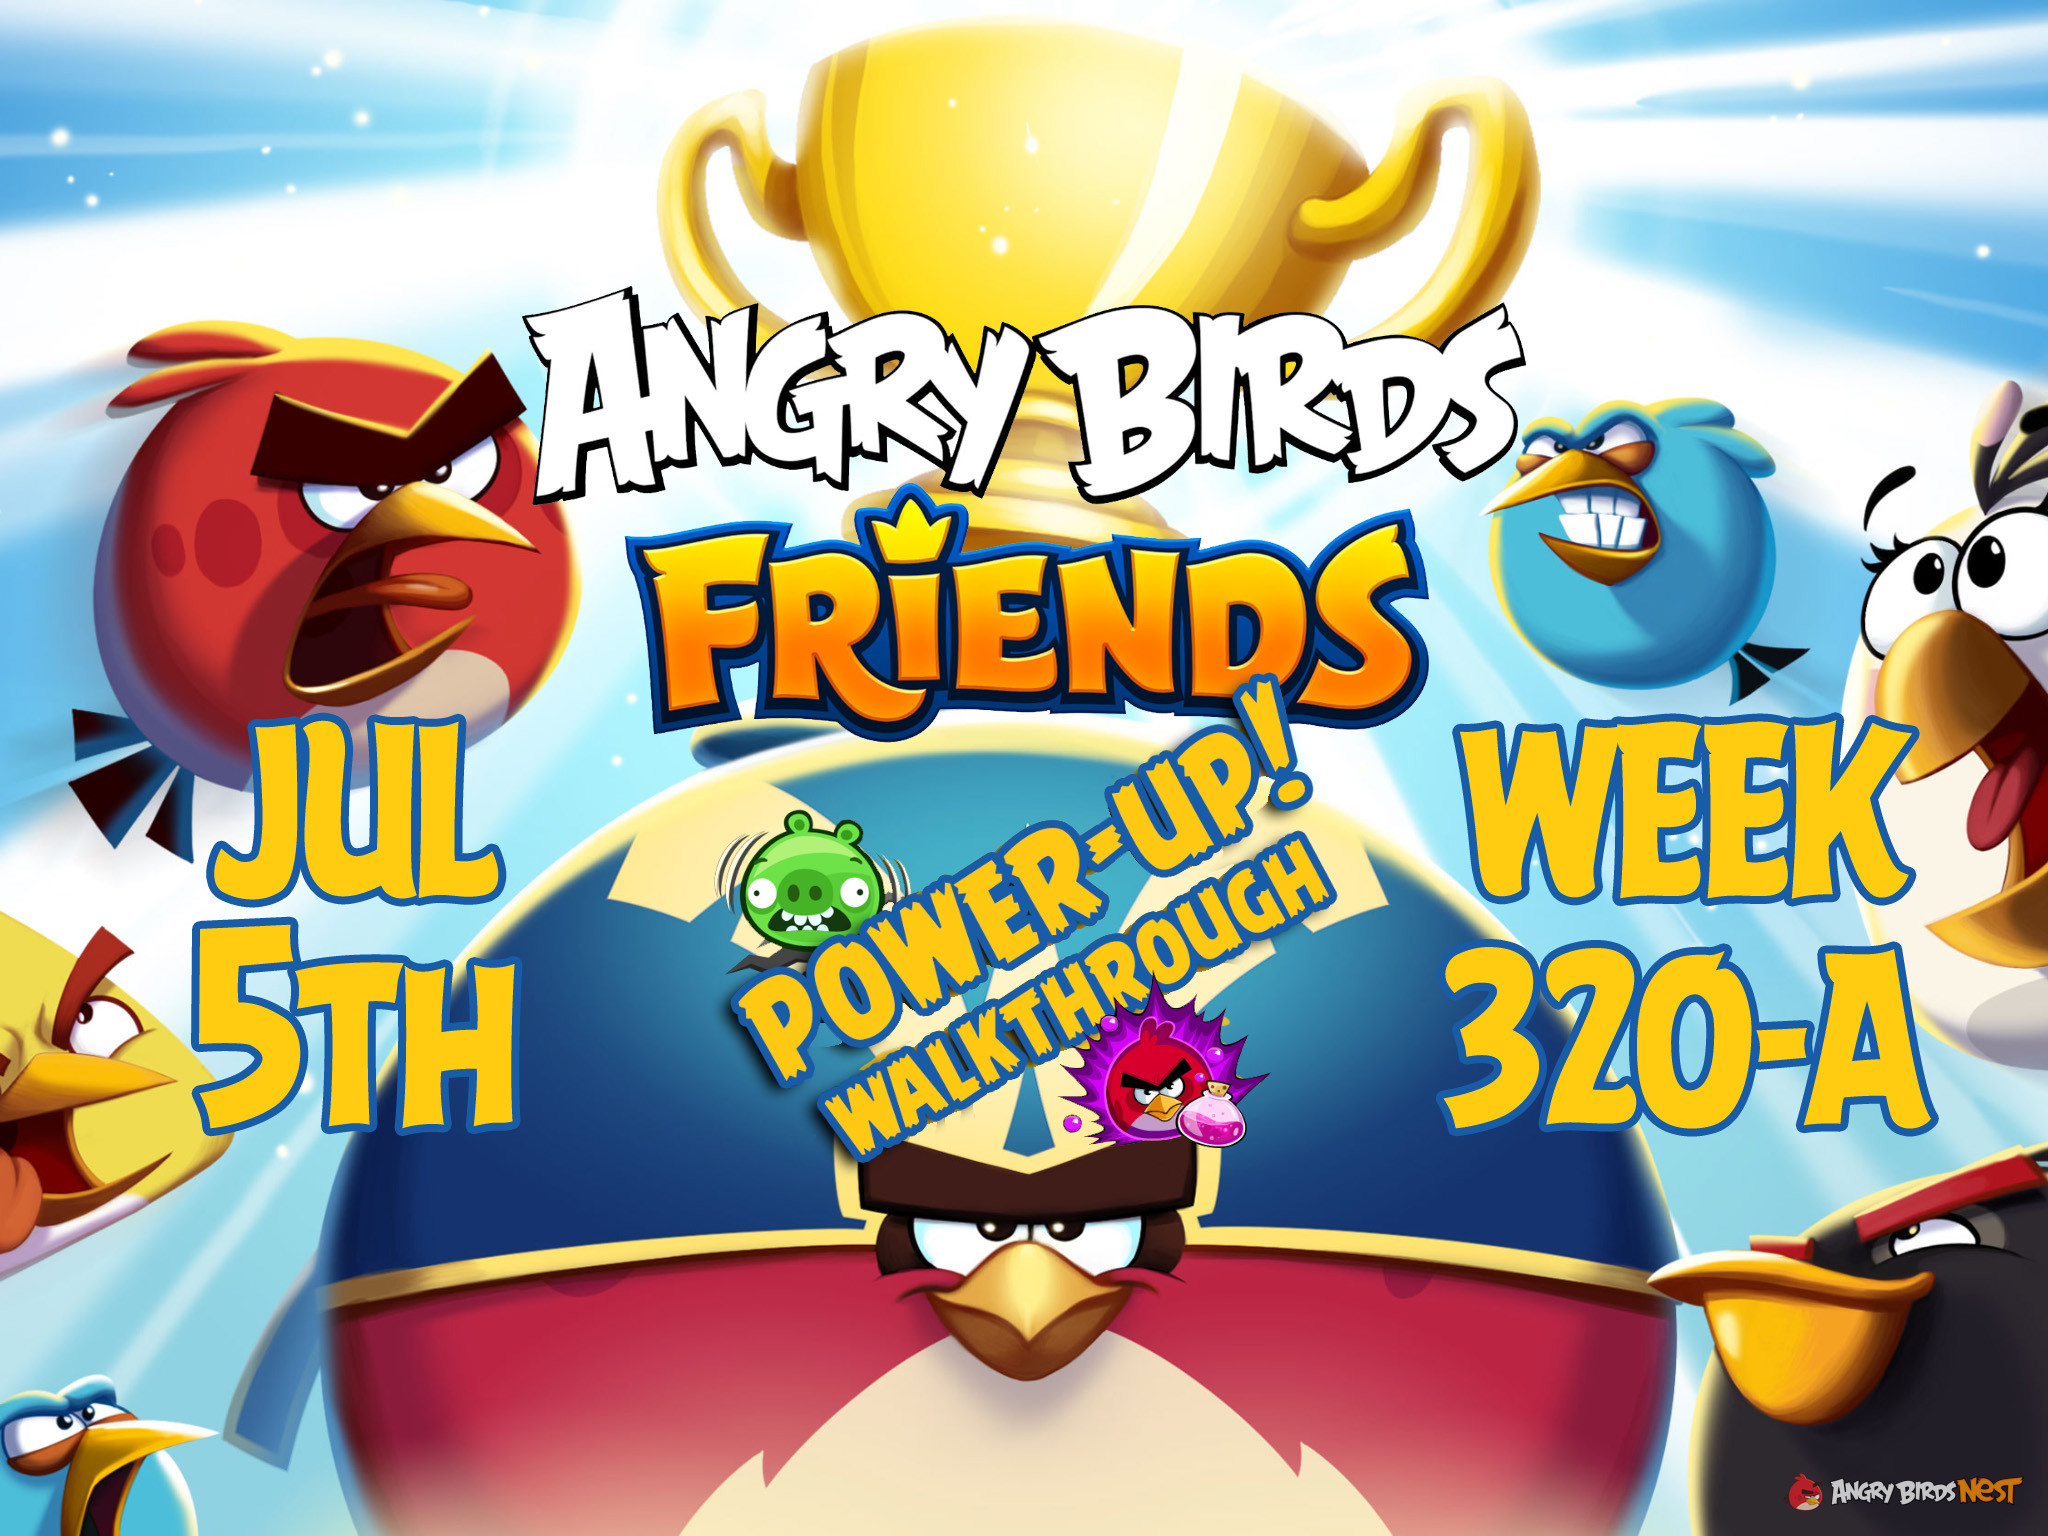 Angry-Birds-Friends-Tournament-Week-320-A-Feature-Image-PU